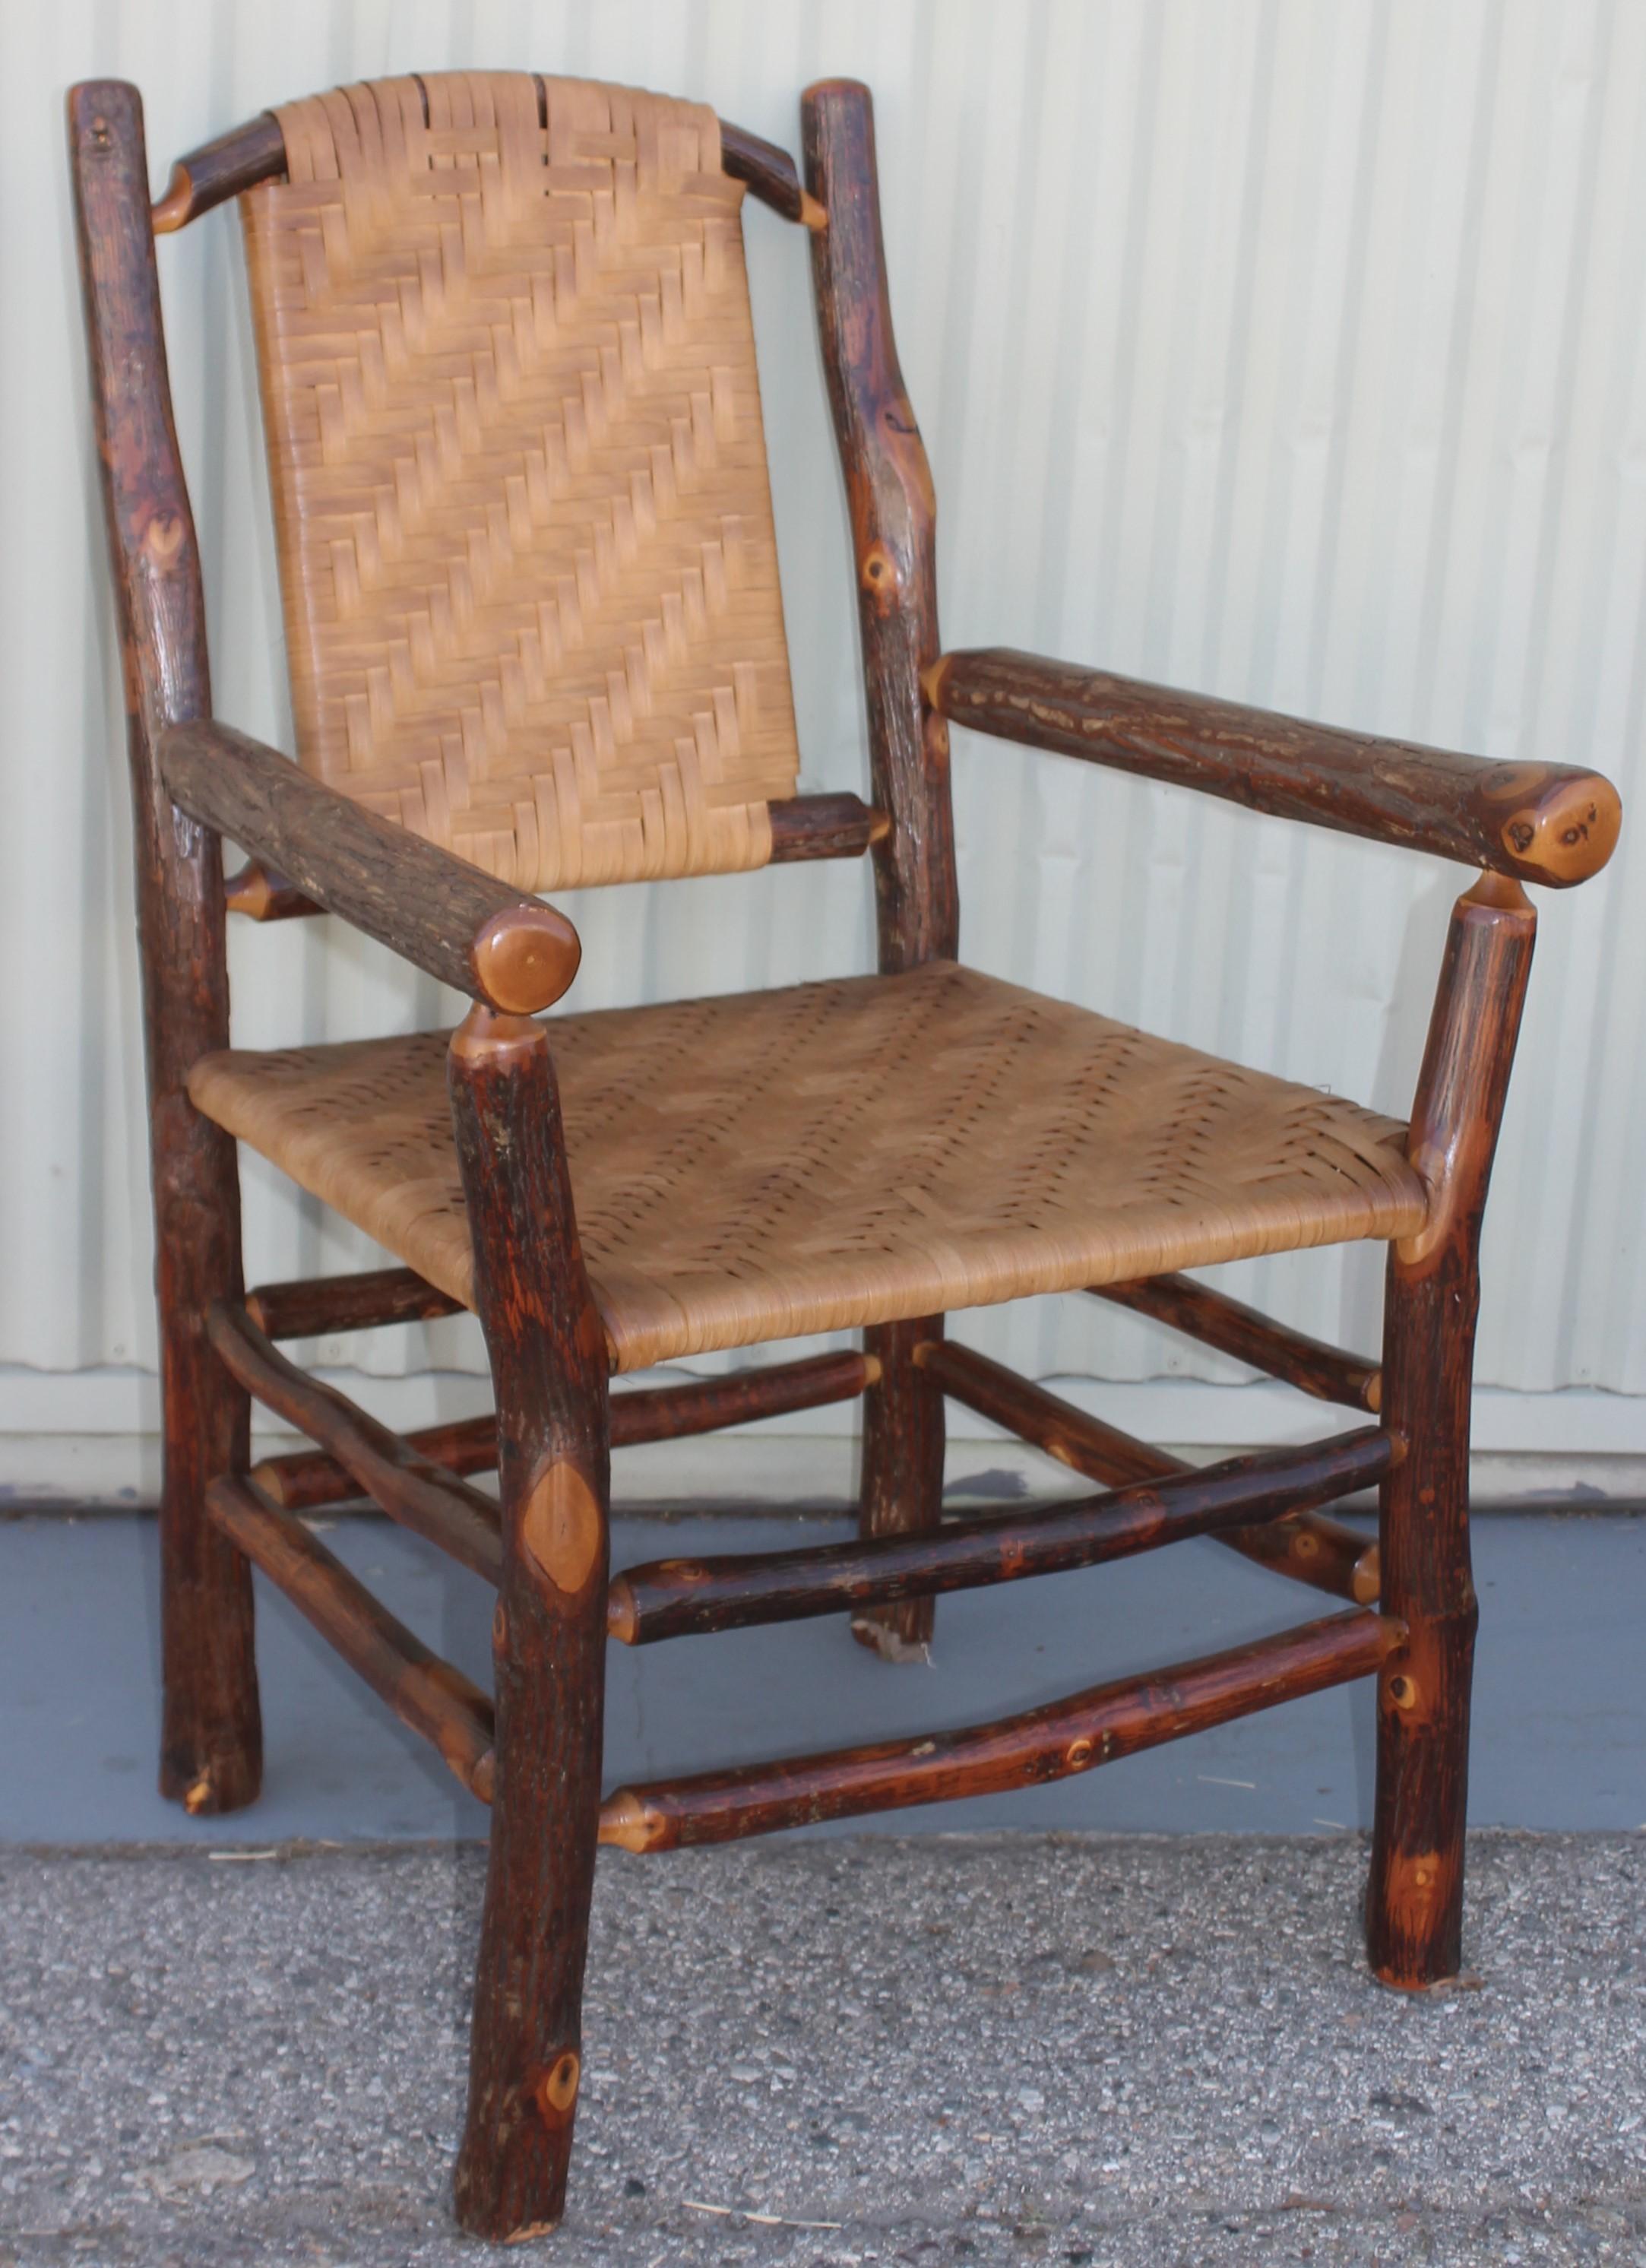 These fine Old Hickory chairs are in fine condition. The two arm chairs match the two side chairs. The condition are all very good and comfortable.


Side chairs measure 19 x 18 x 37
Arm chairs measure 23 x 24 x 37.